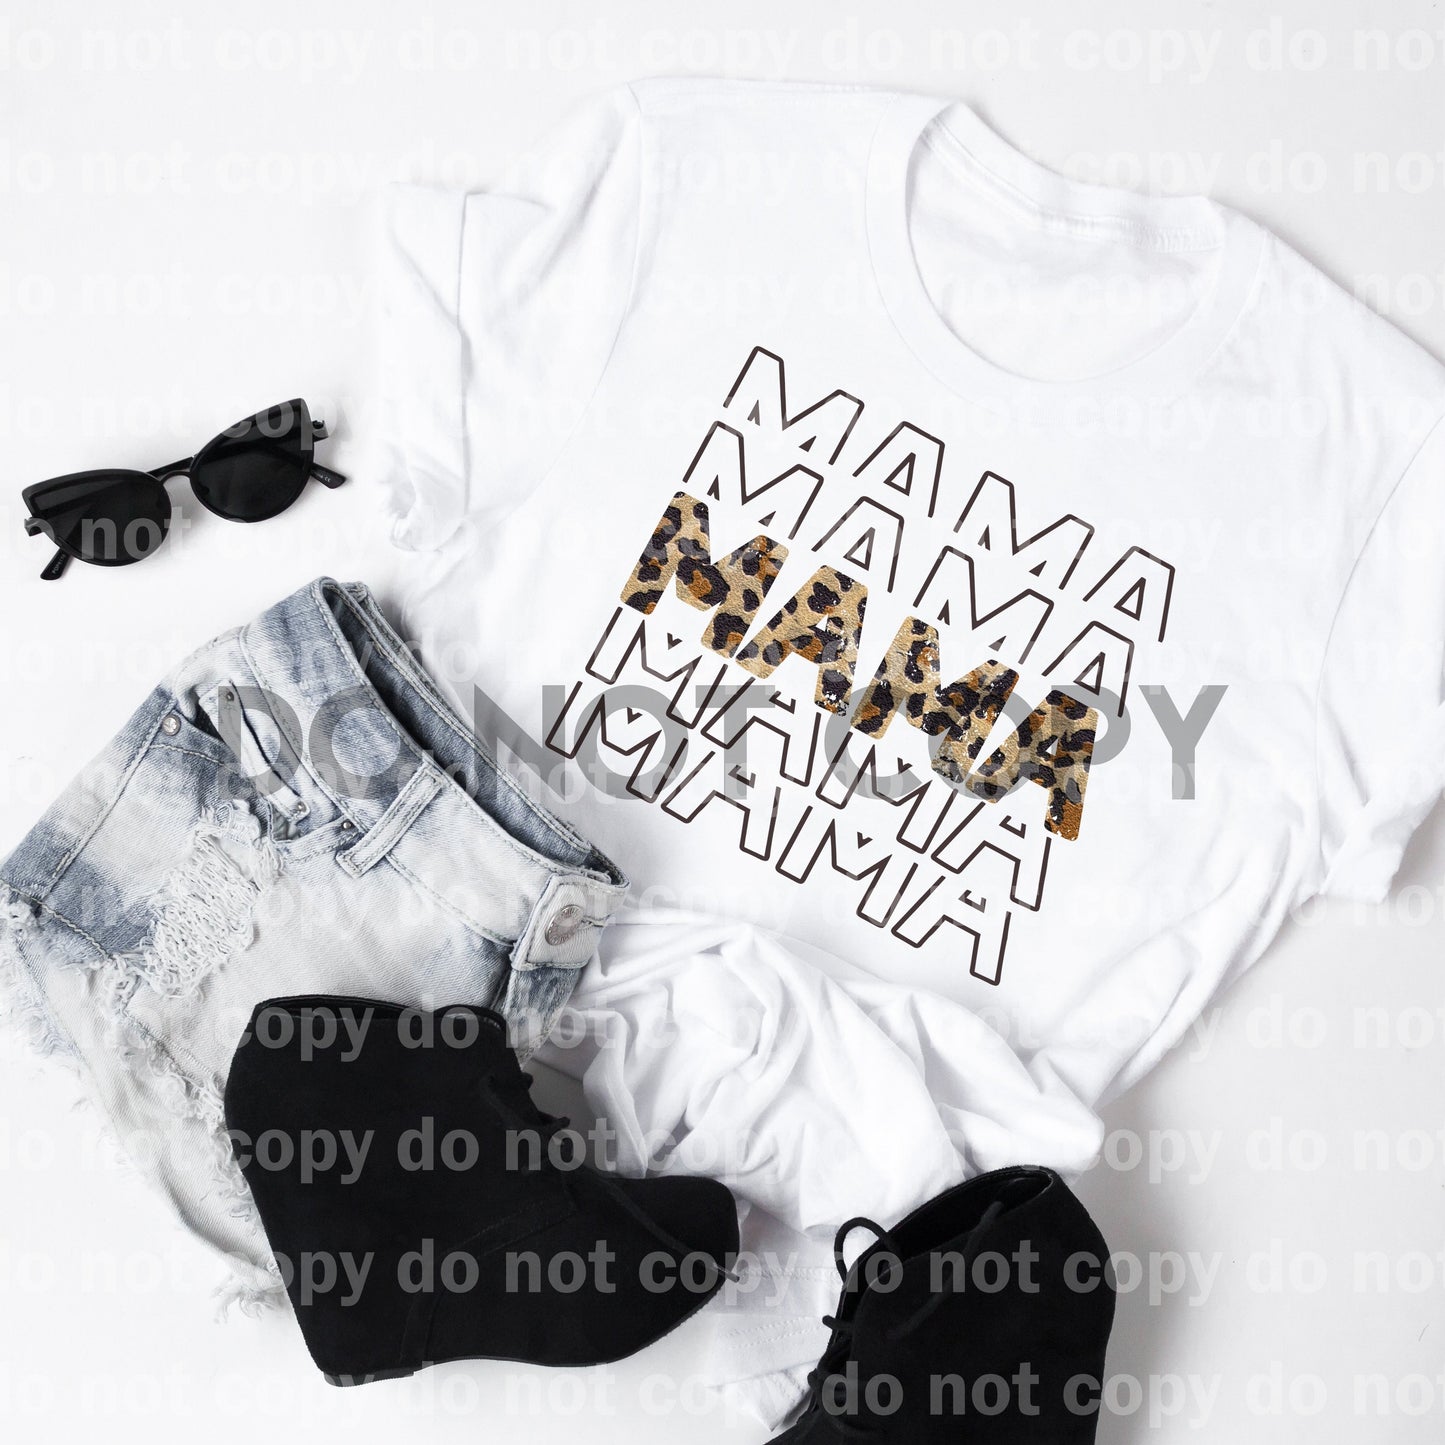 Mama Word Stack Dream Print or Sublimation Print